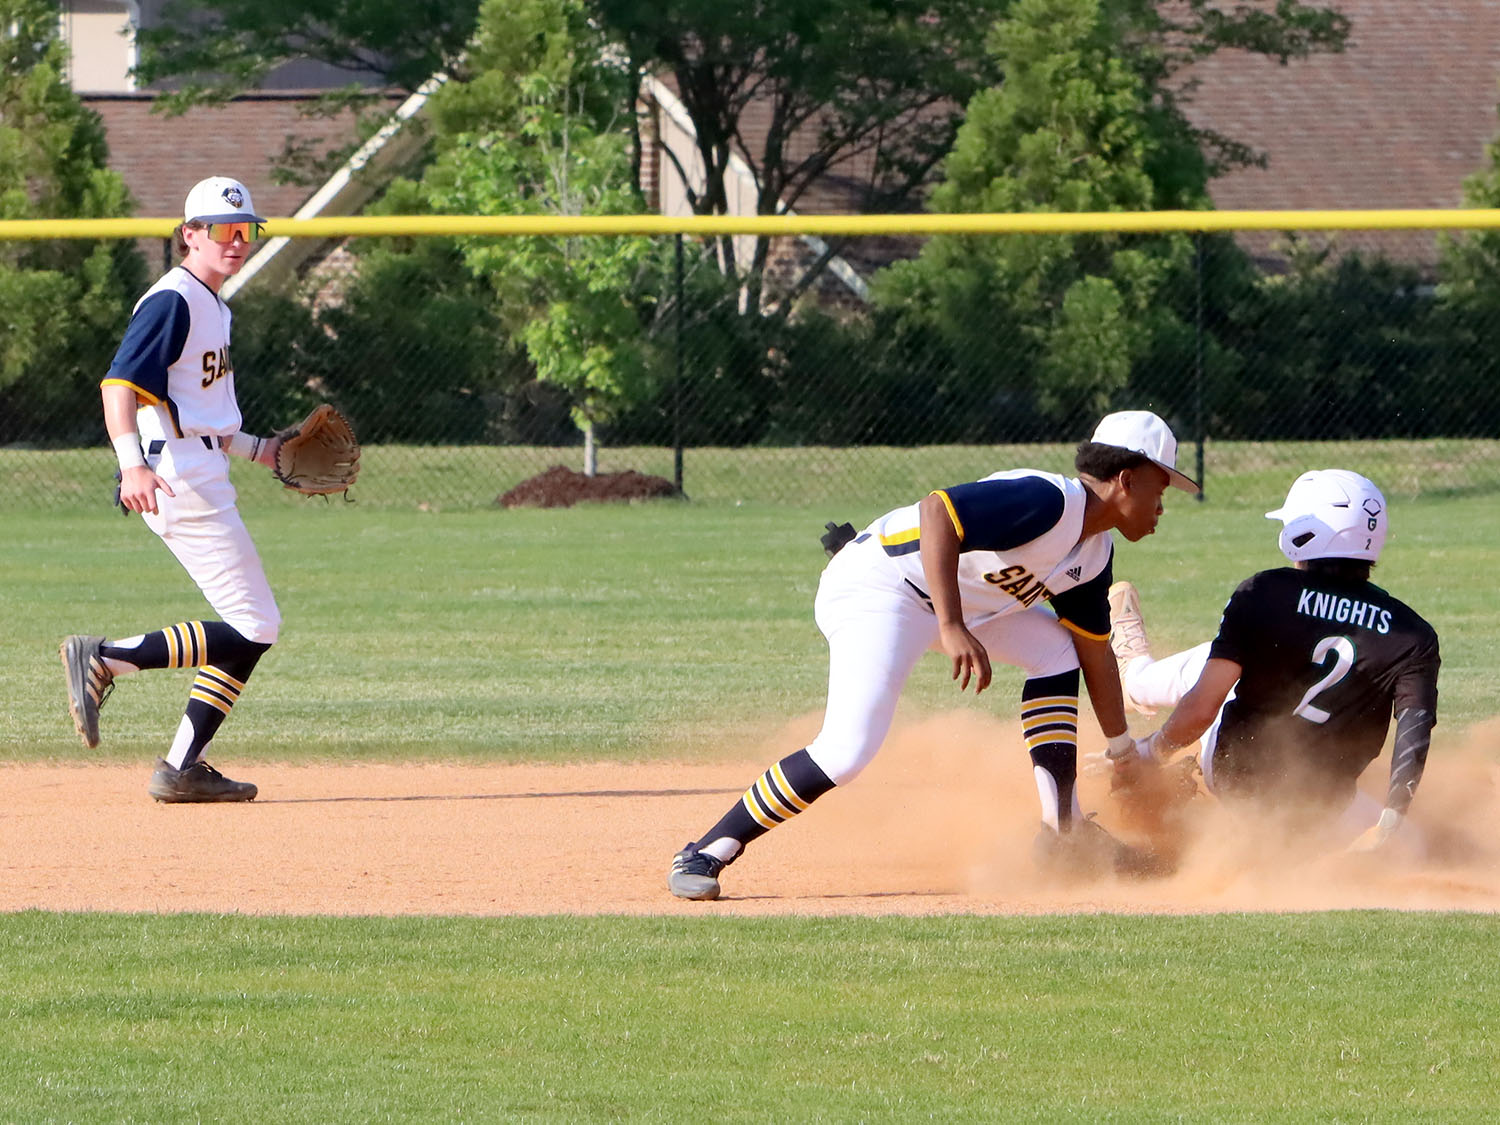 Nike Wiggins tags a Greenfield runner out at 2nd.